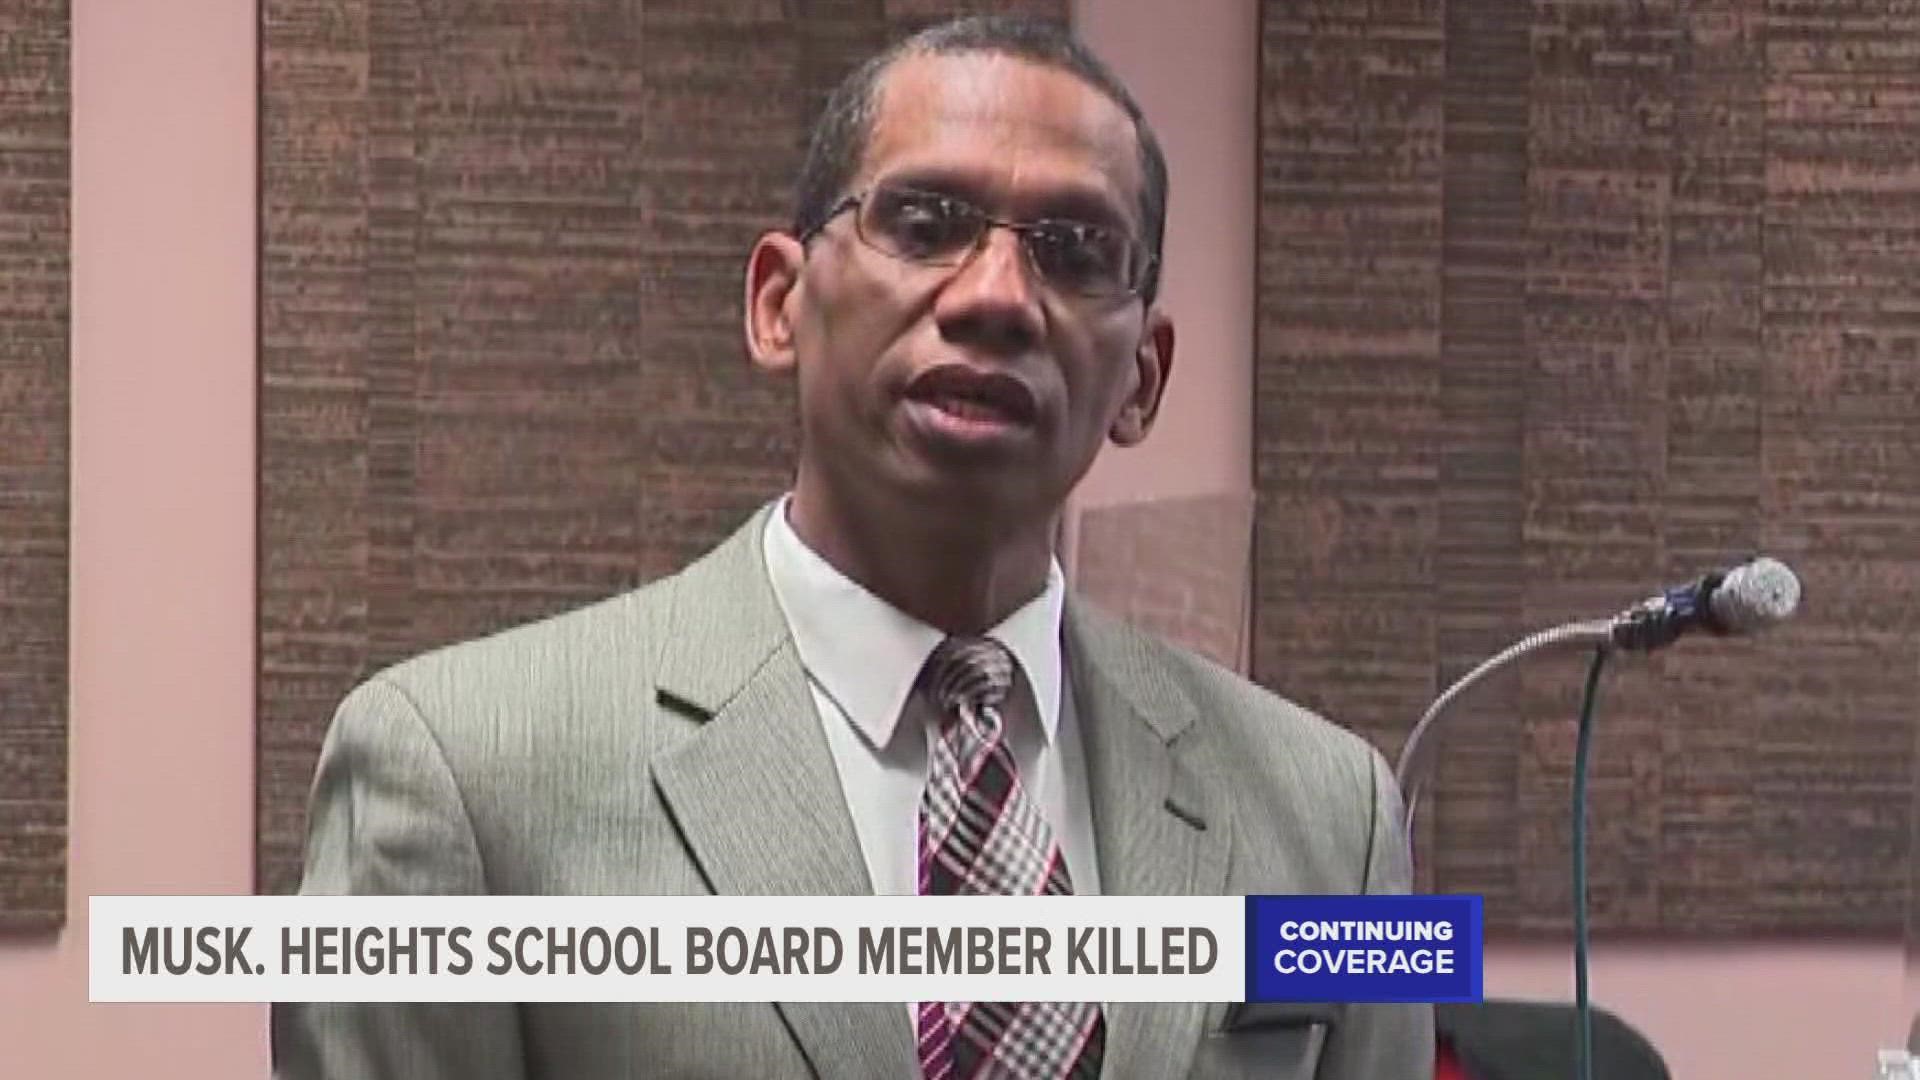 Investigators say the shooting is an isolated incident and is not connected to Muhammad's school board membership.